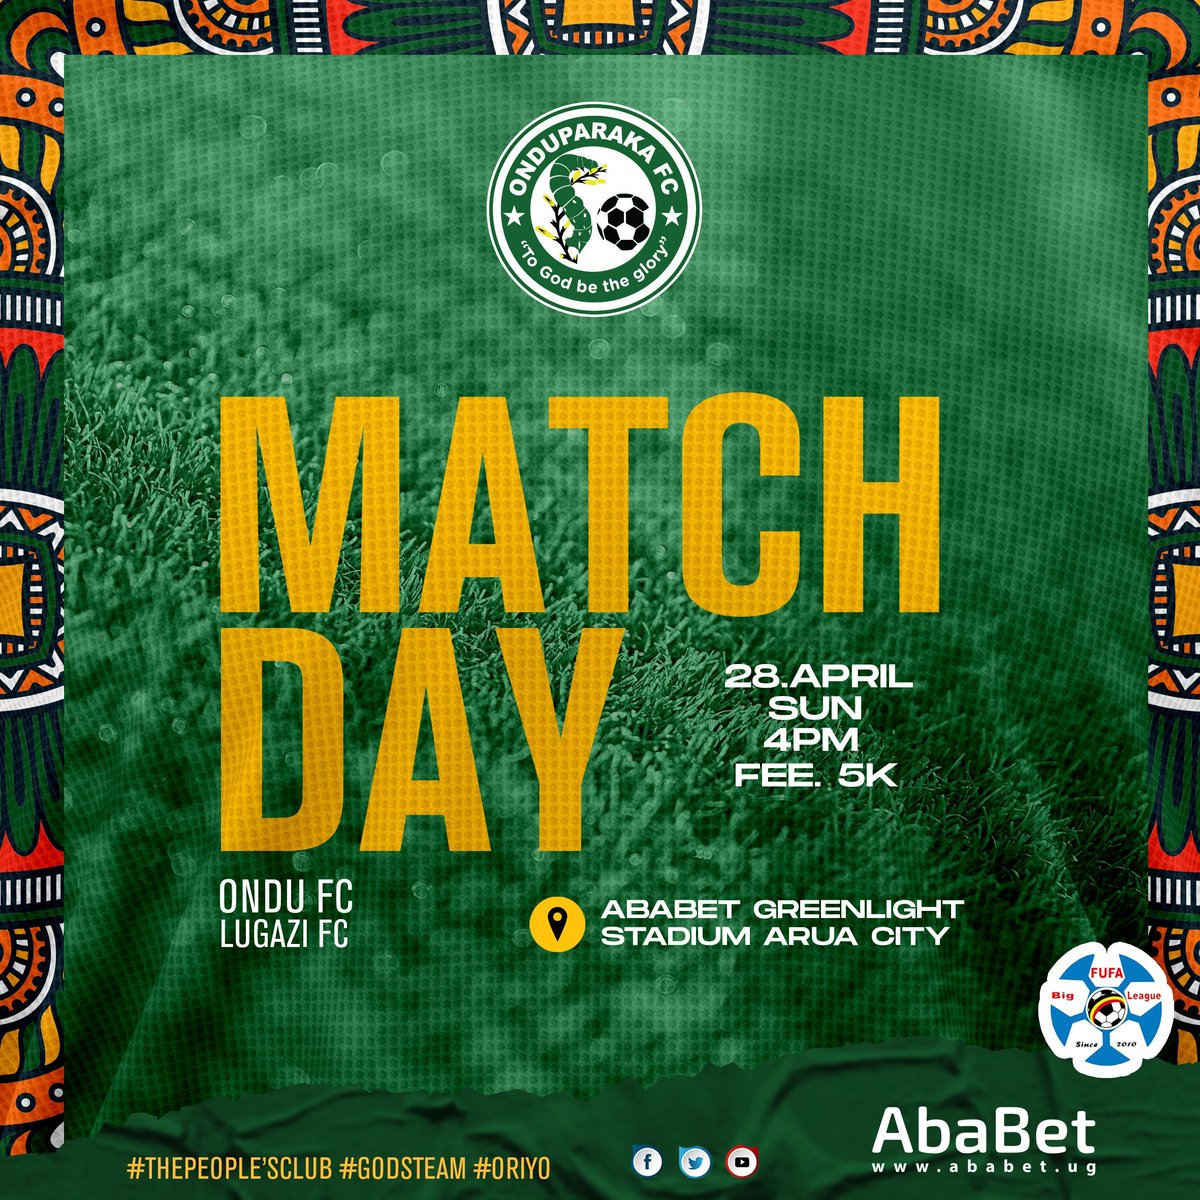 #ONDULUG | MATCH DAY It's Action Packed Match Day at Ababet Greenlight as ONDU FANS Face Arua Media at 1PM before the big one against Lugazi FC at 4PM. Entrance: 5,000/- (Paid once) #AmaOnduparaka #GodsTeam